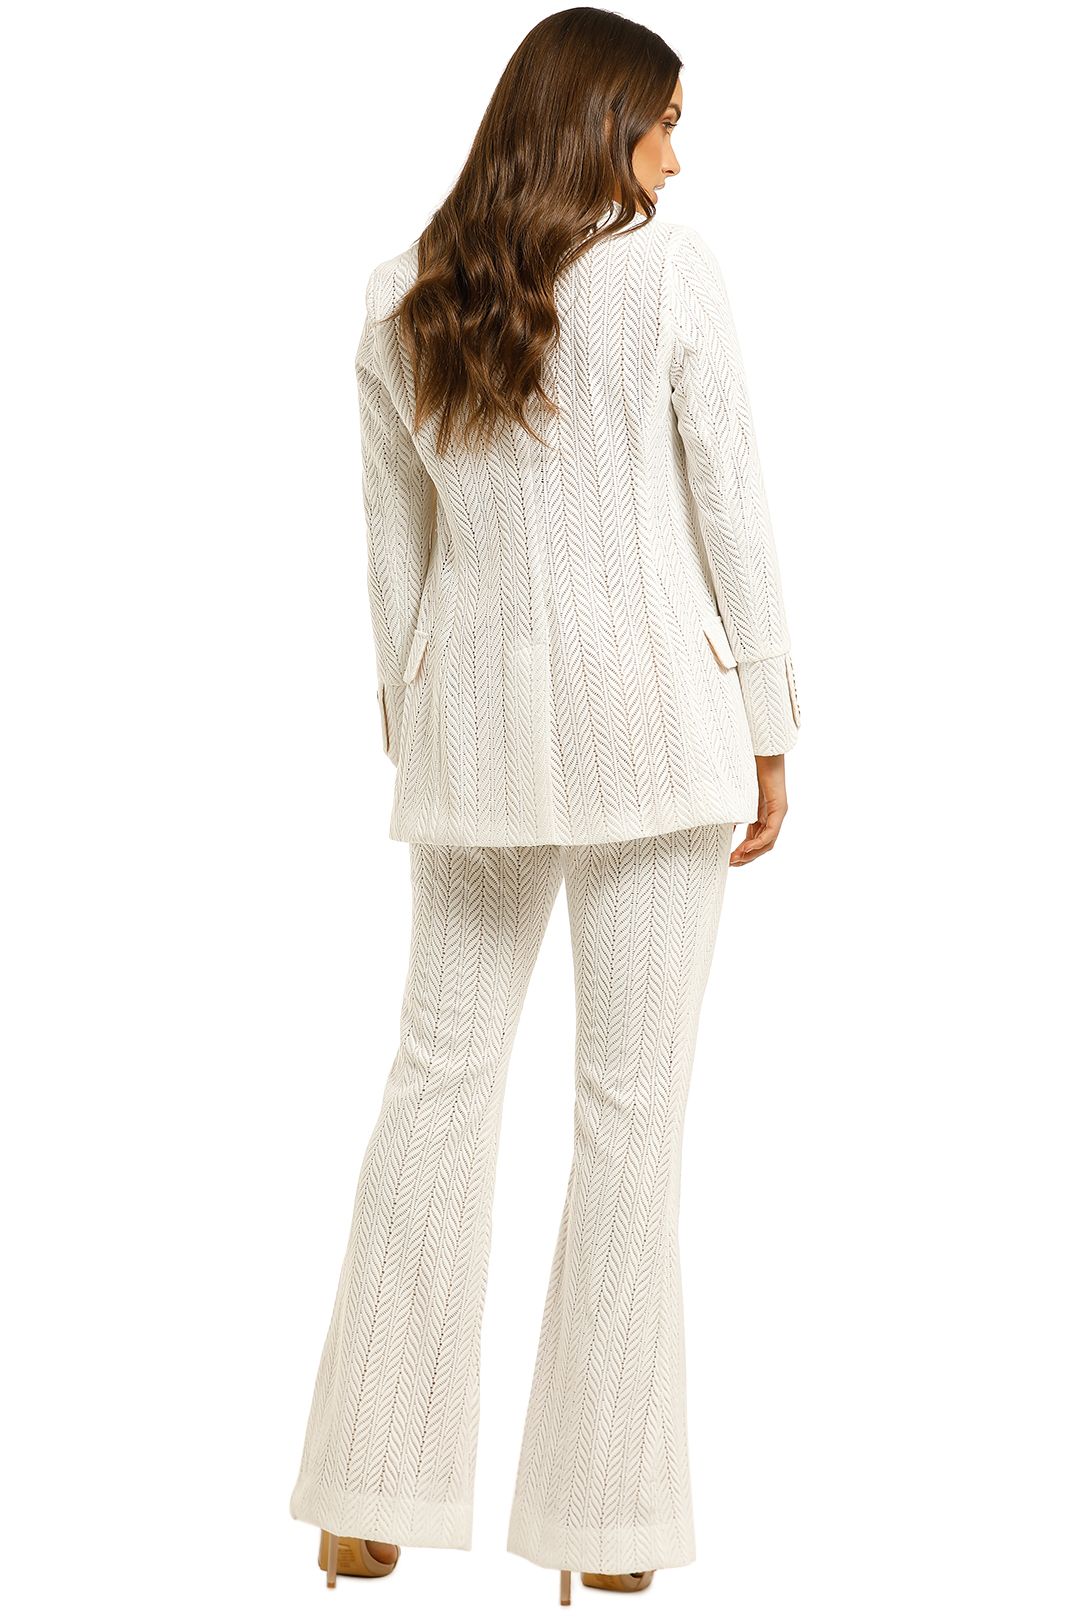 We-Are-Kindred-Marbella-Blazer-and-Pant Set-Frost-Back